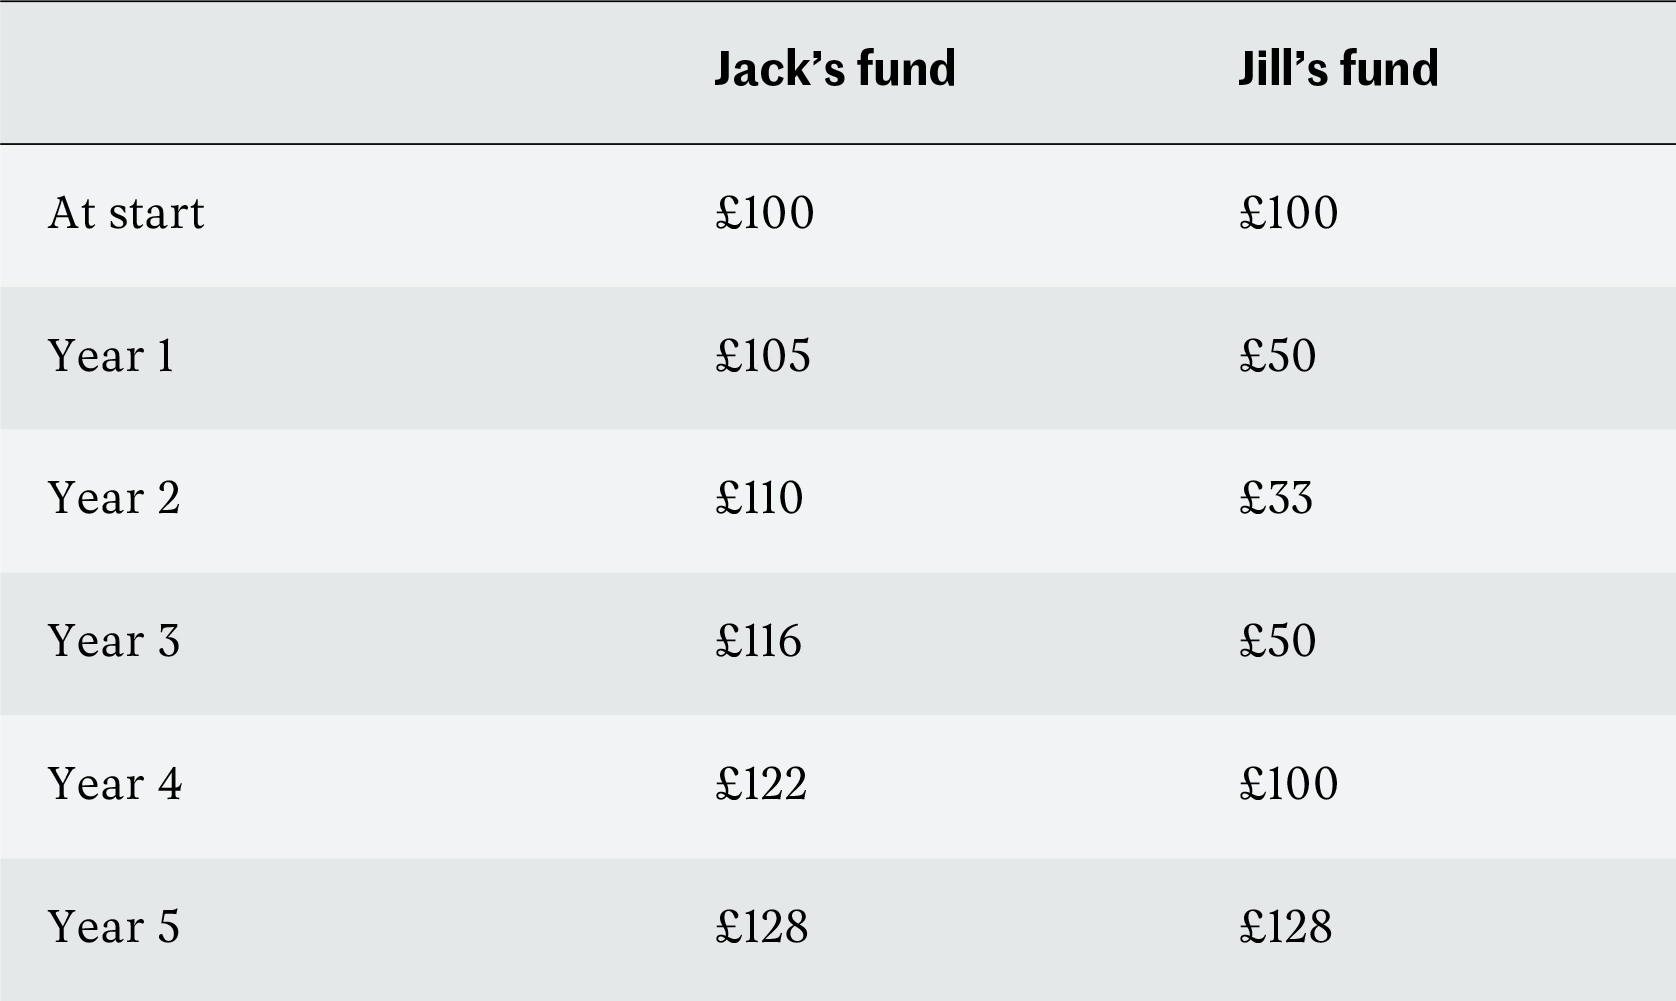 Jack and Jill £100 fund values